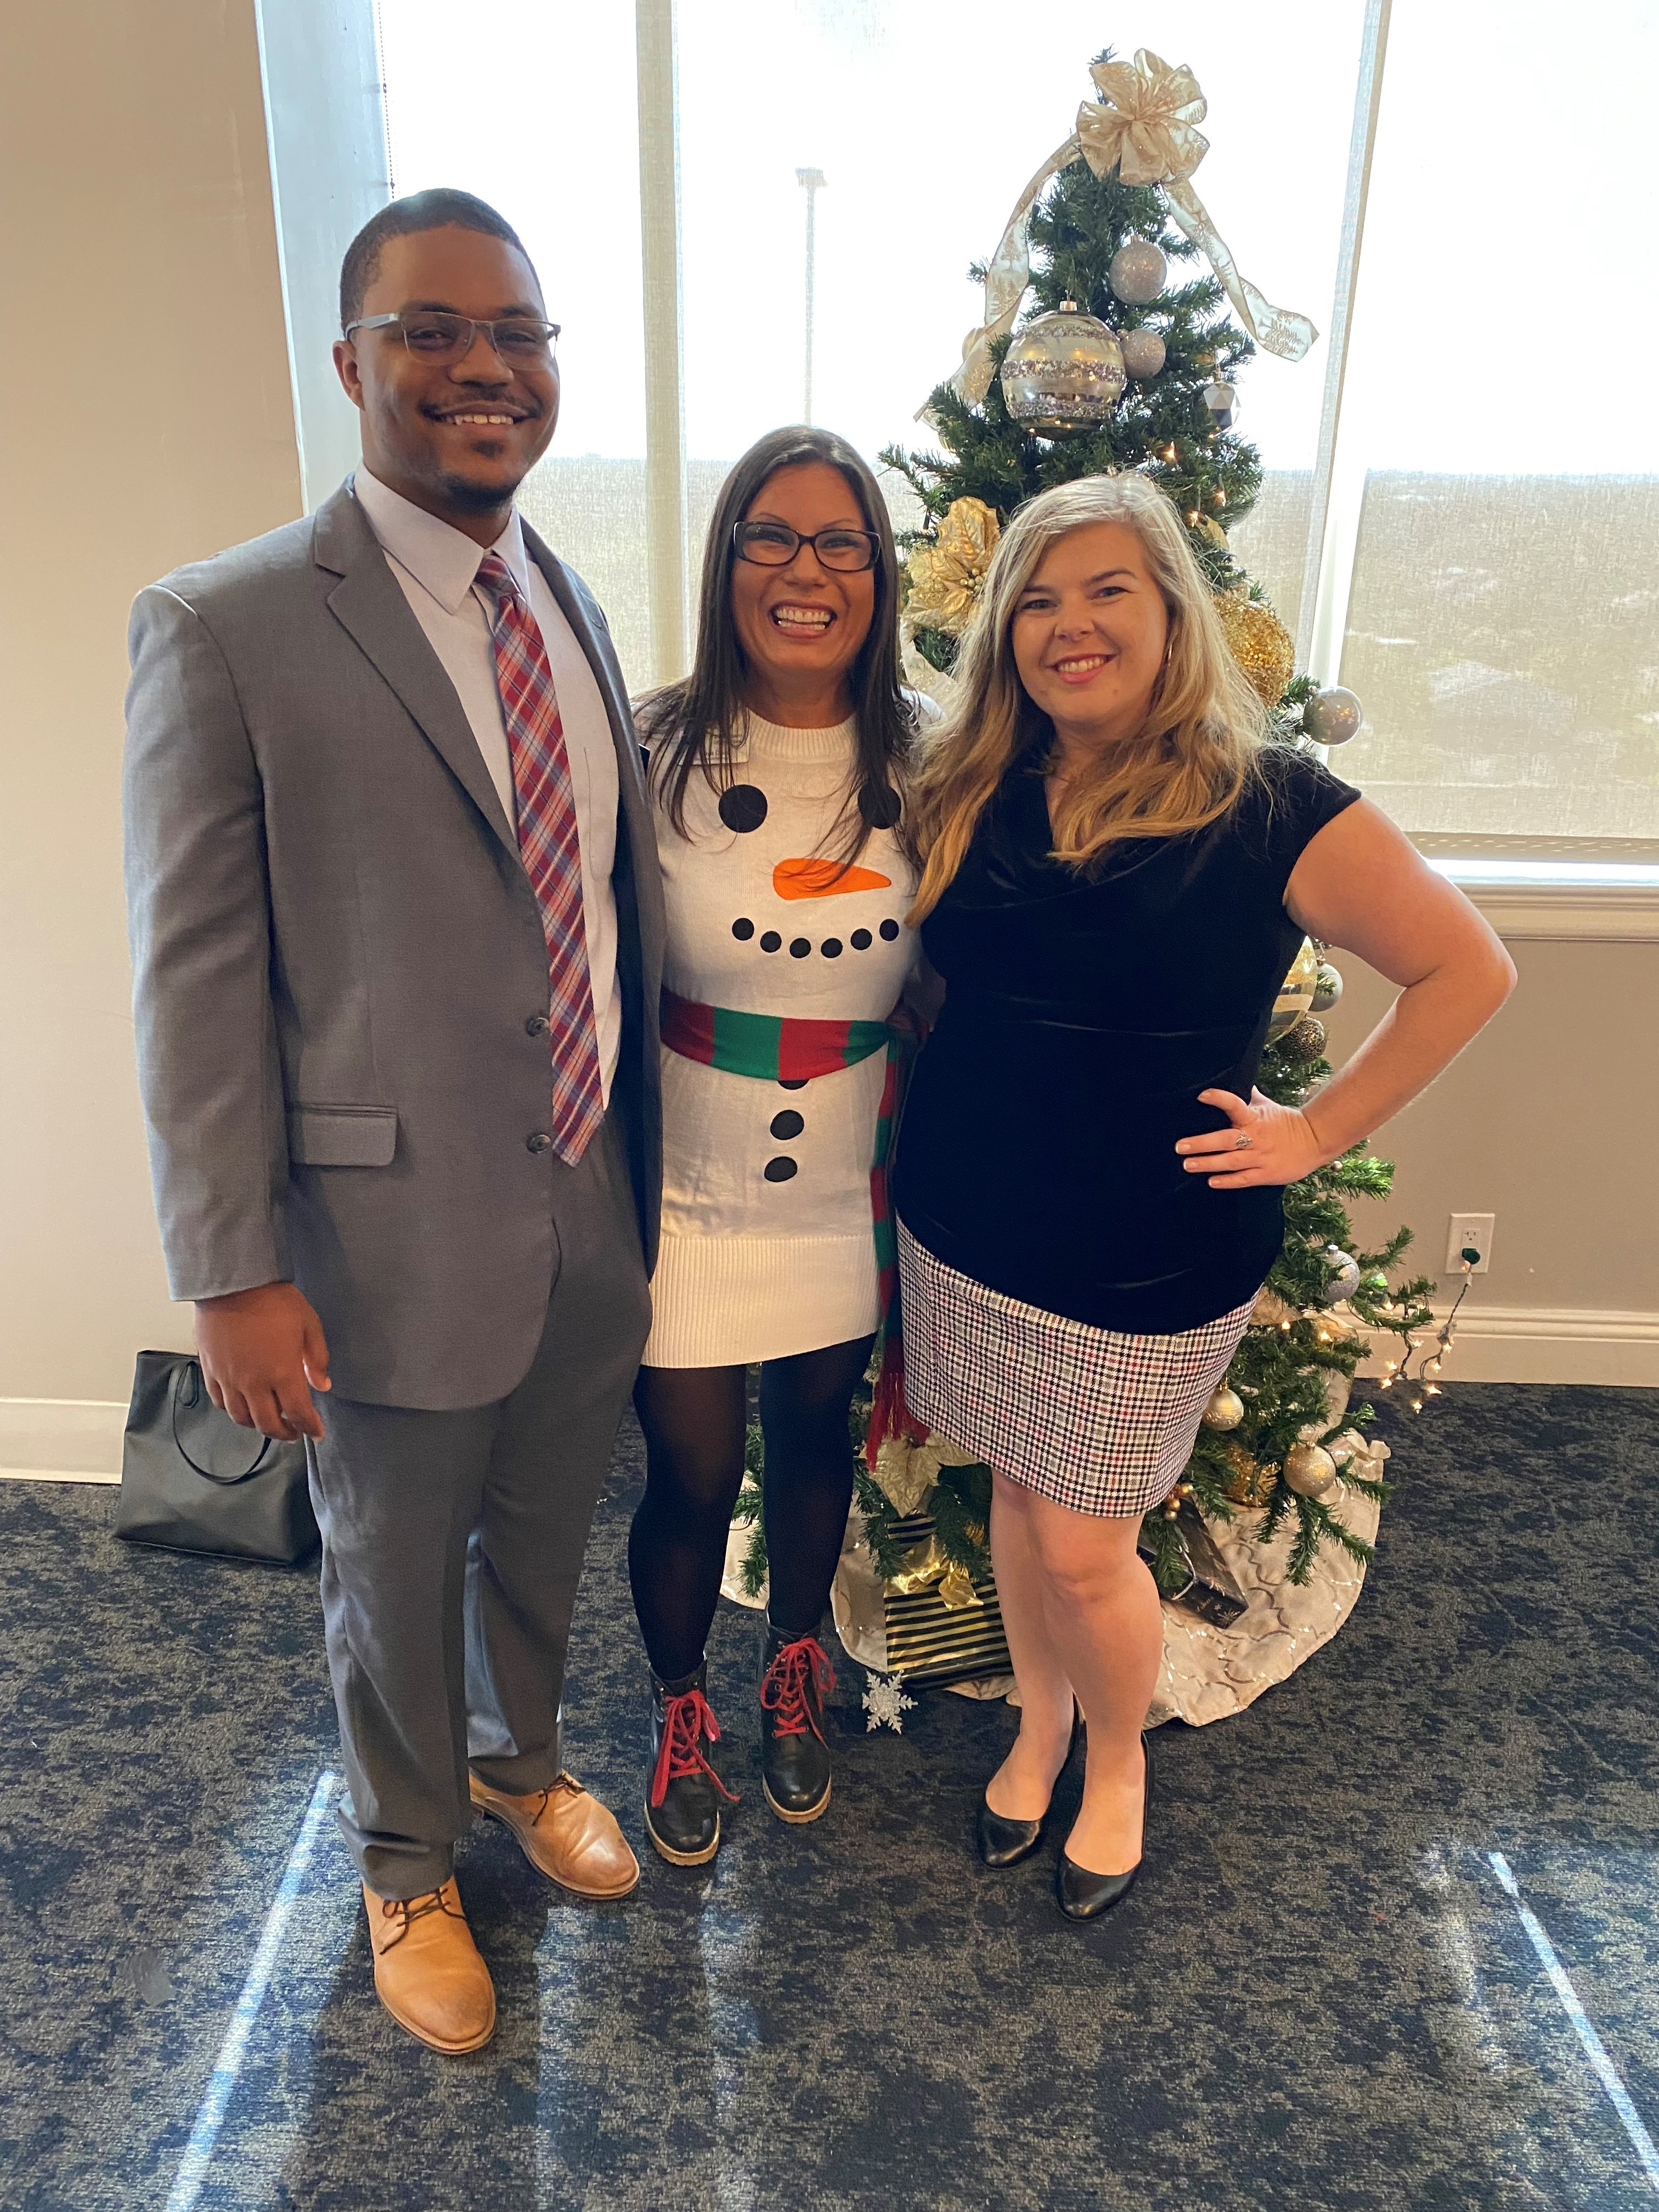 Event Follow Up: STCOC December Holiday Membership Luncheon!